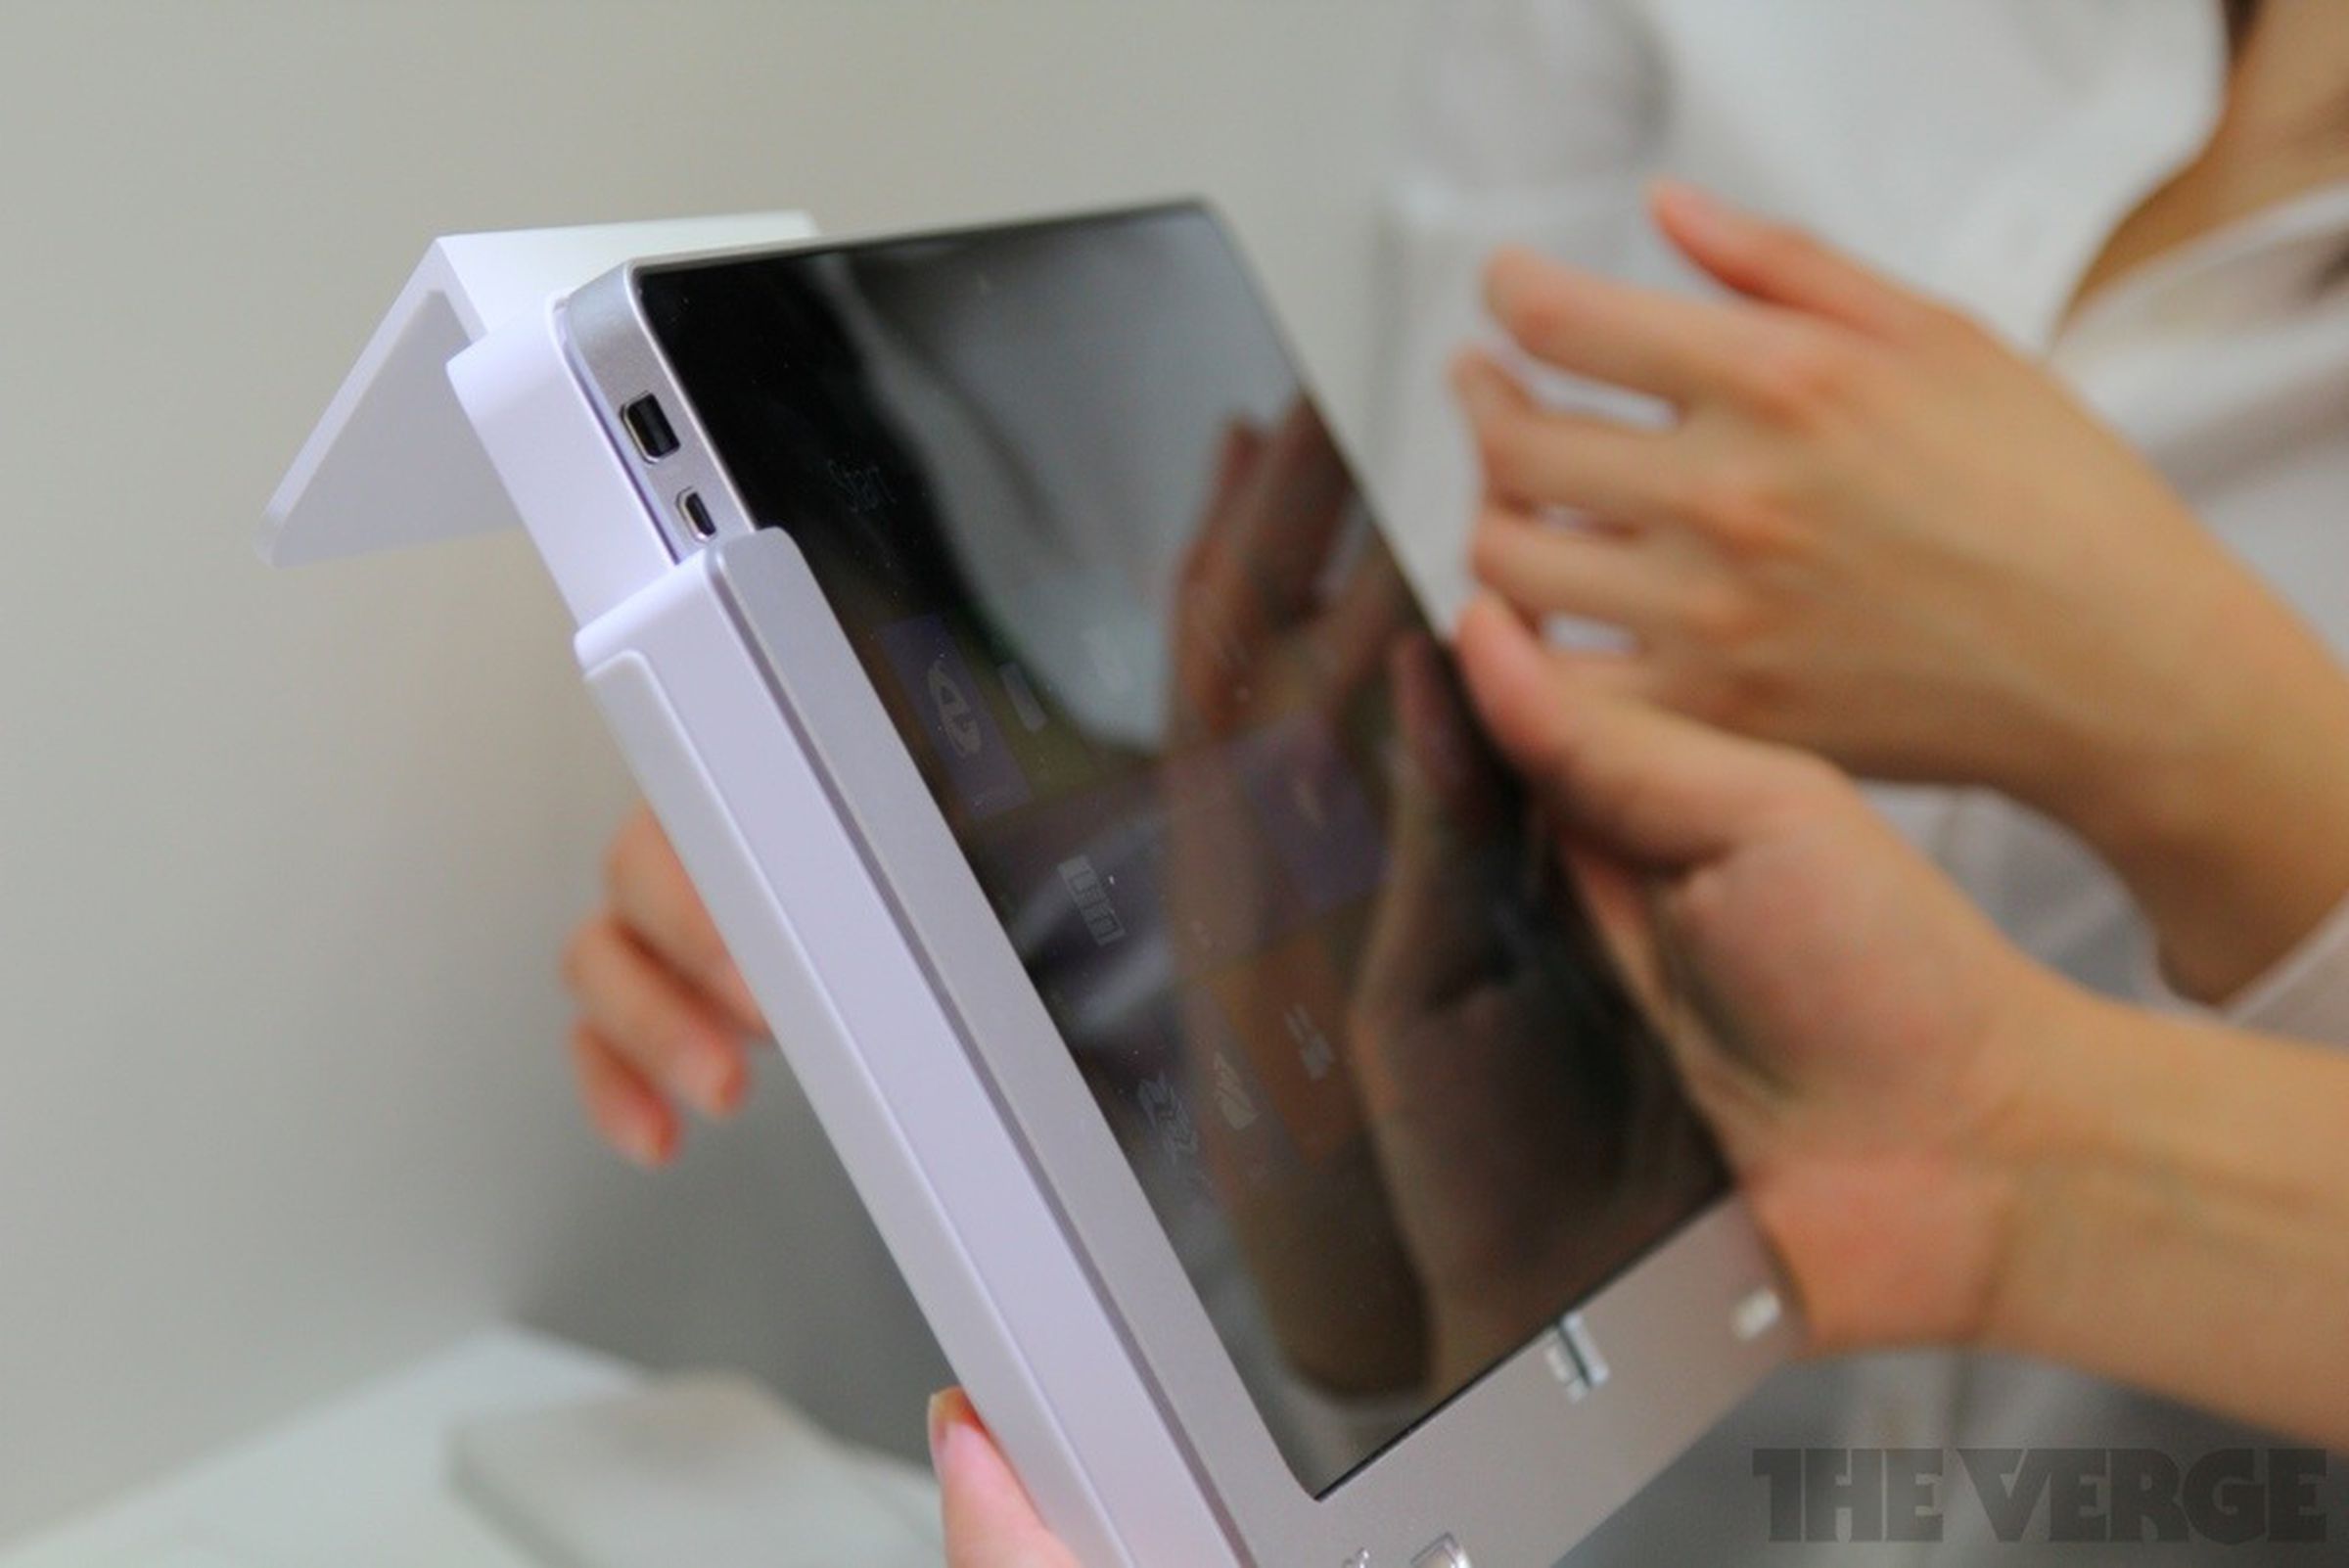 Acer Iconia W700 hands-on pictures